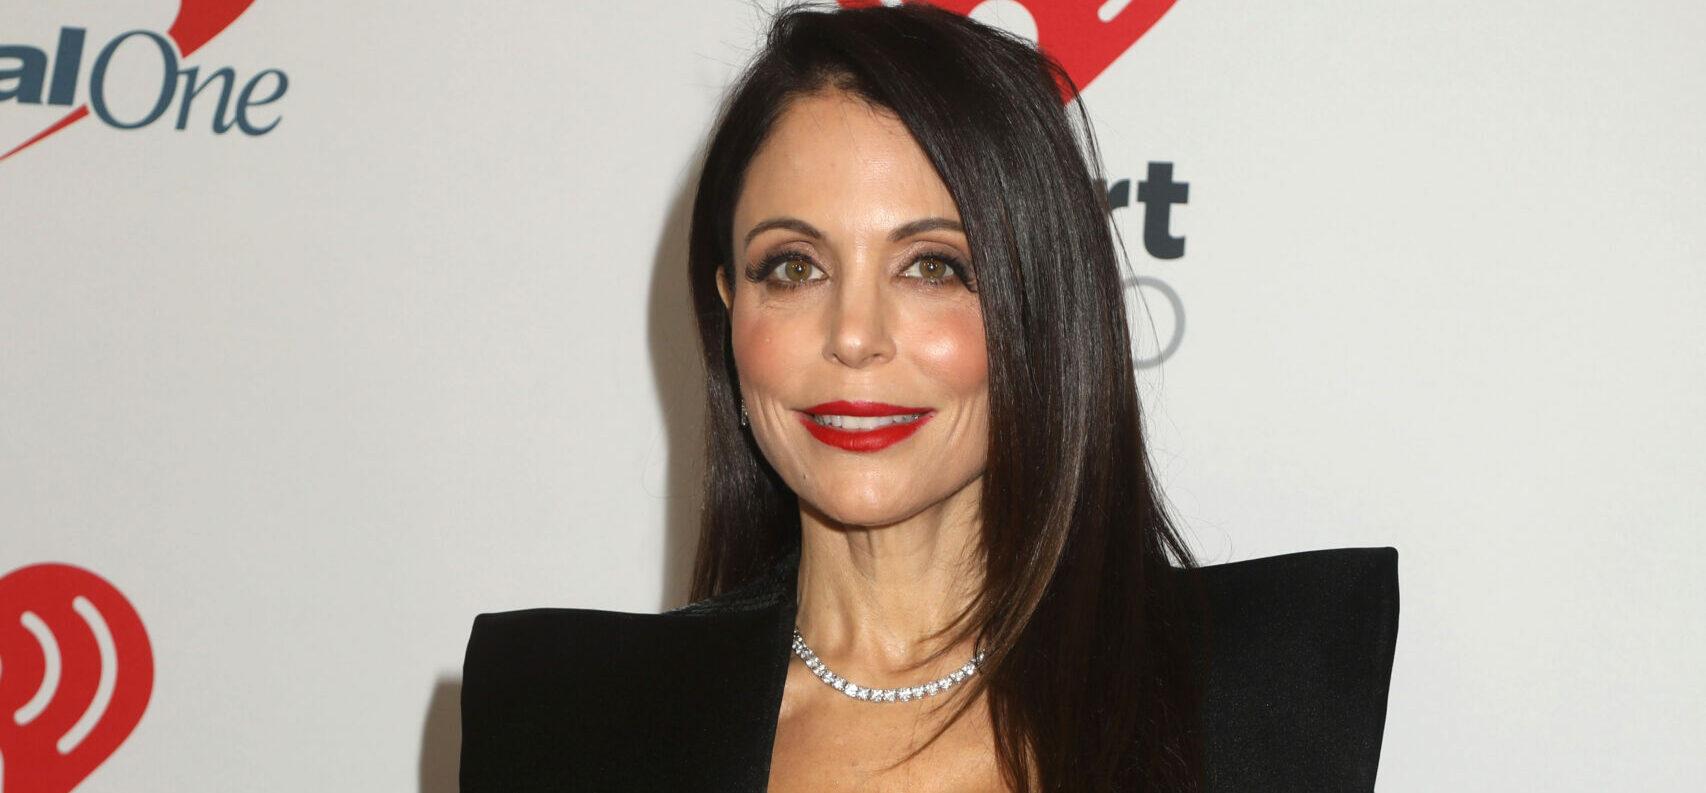 'RHONY' Star Bethenny Frankel Spotted Without Massive Engagement Ring